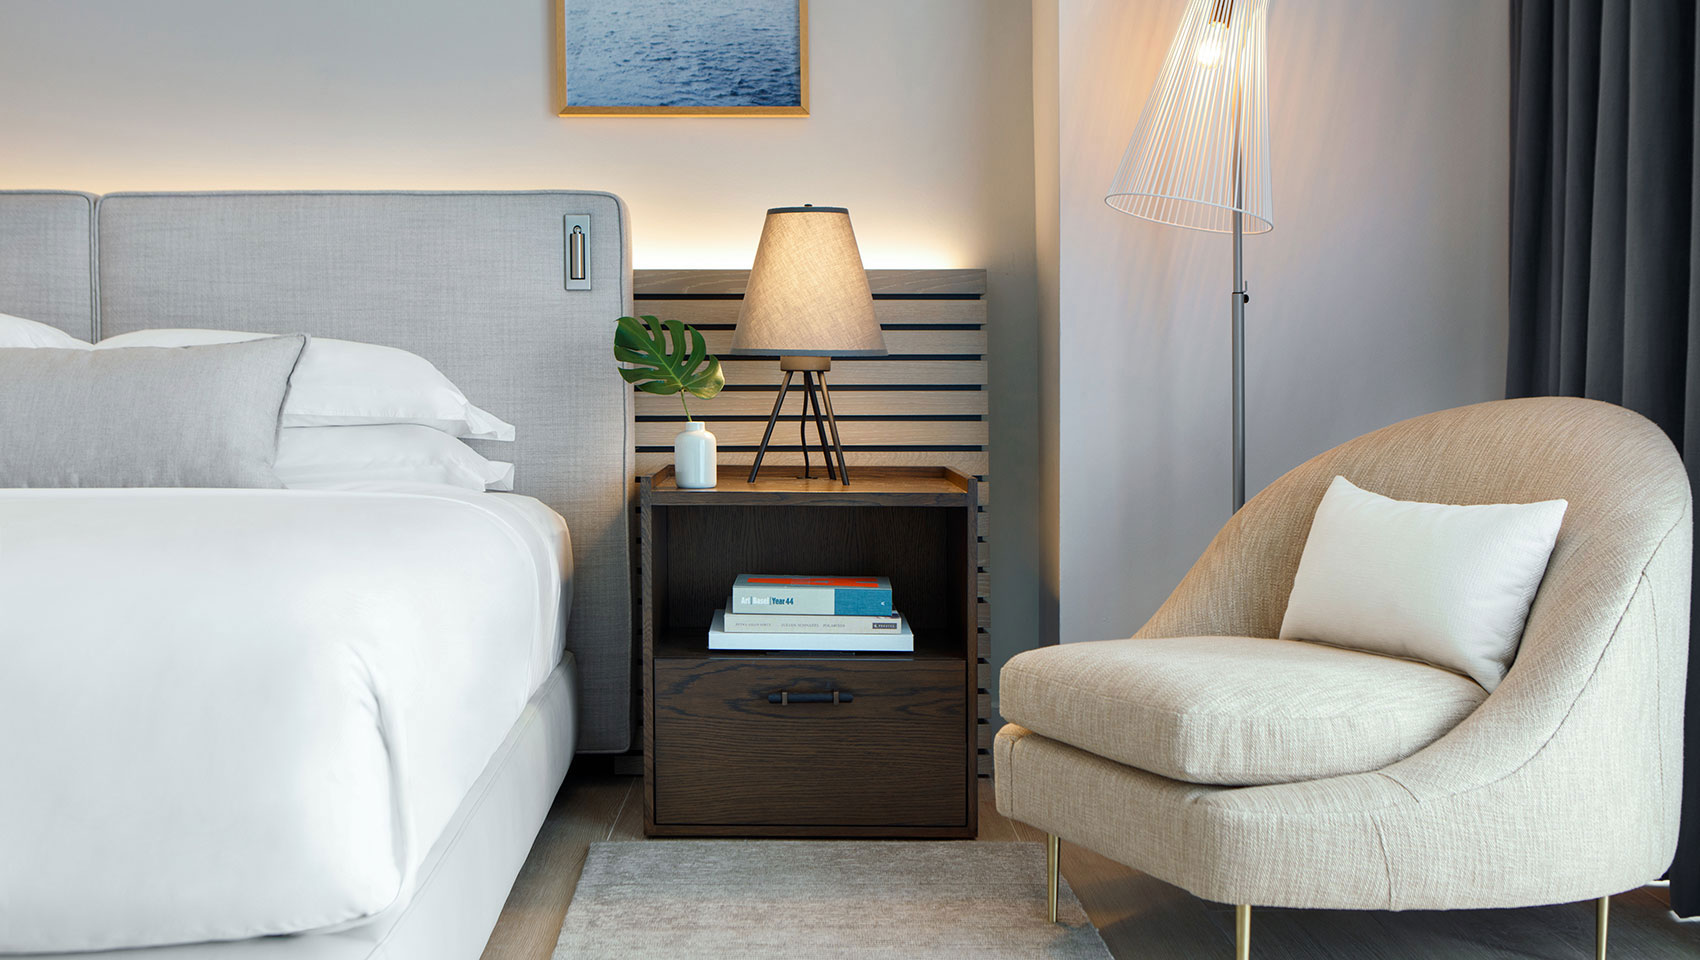 king guestRoom with plush grey headboard, brown nightstand and beige low accent chair.